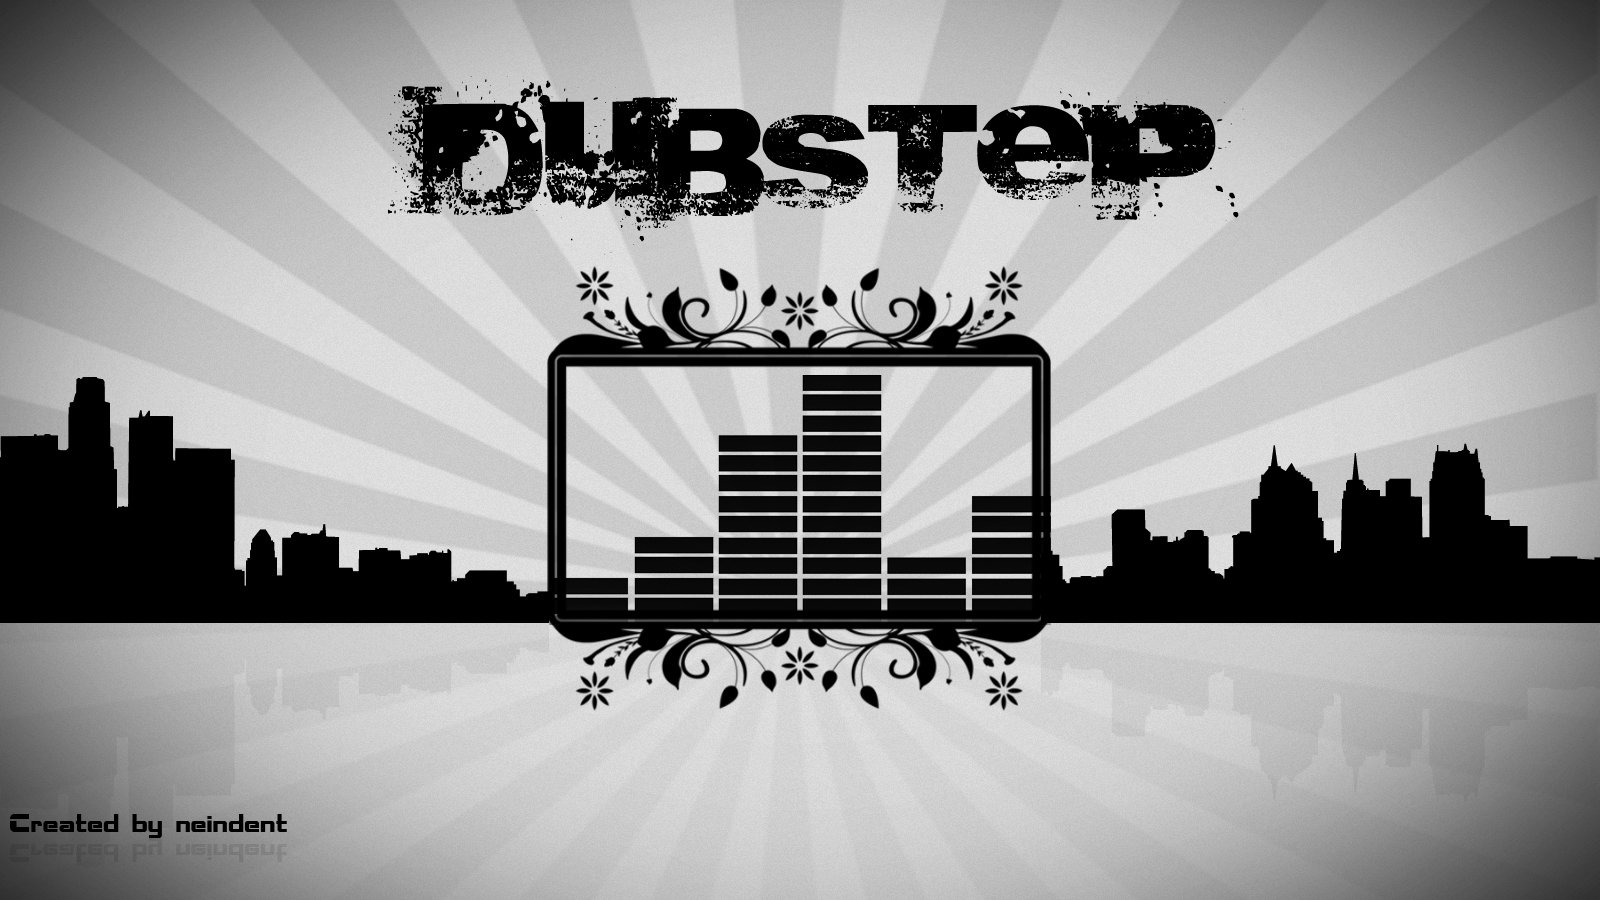 Download hd 1600x900 Dubstep PC background ID:11233 for free